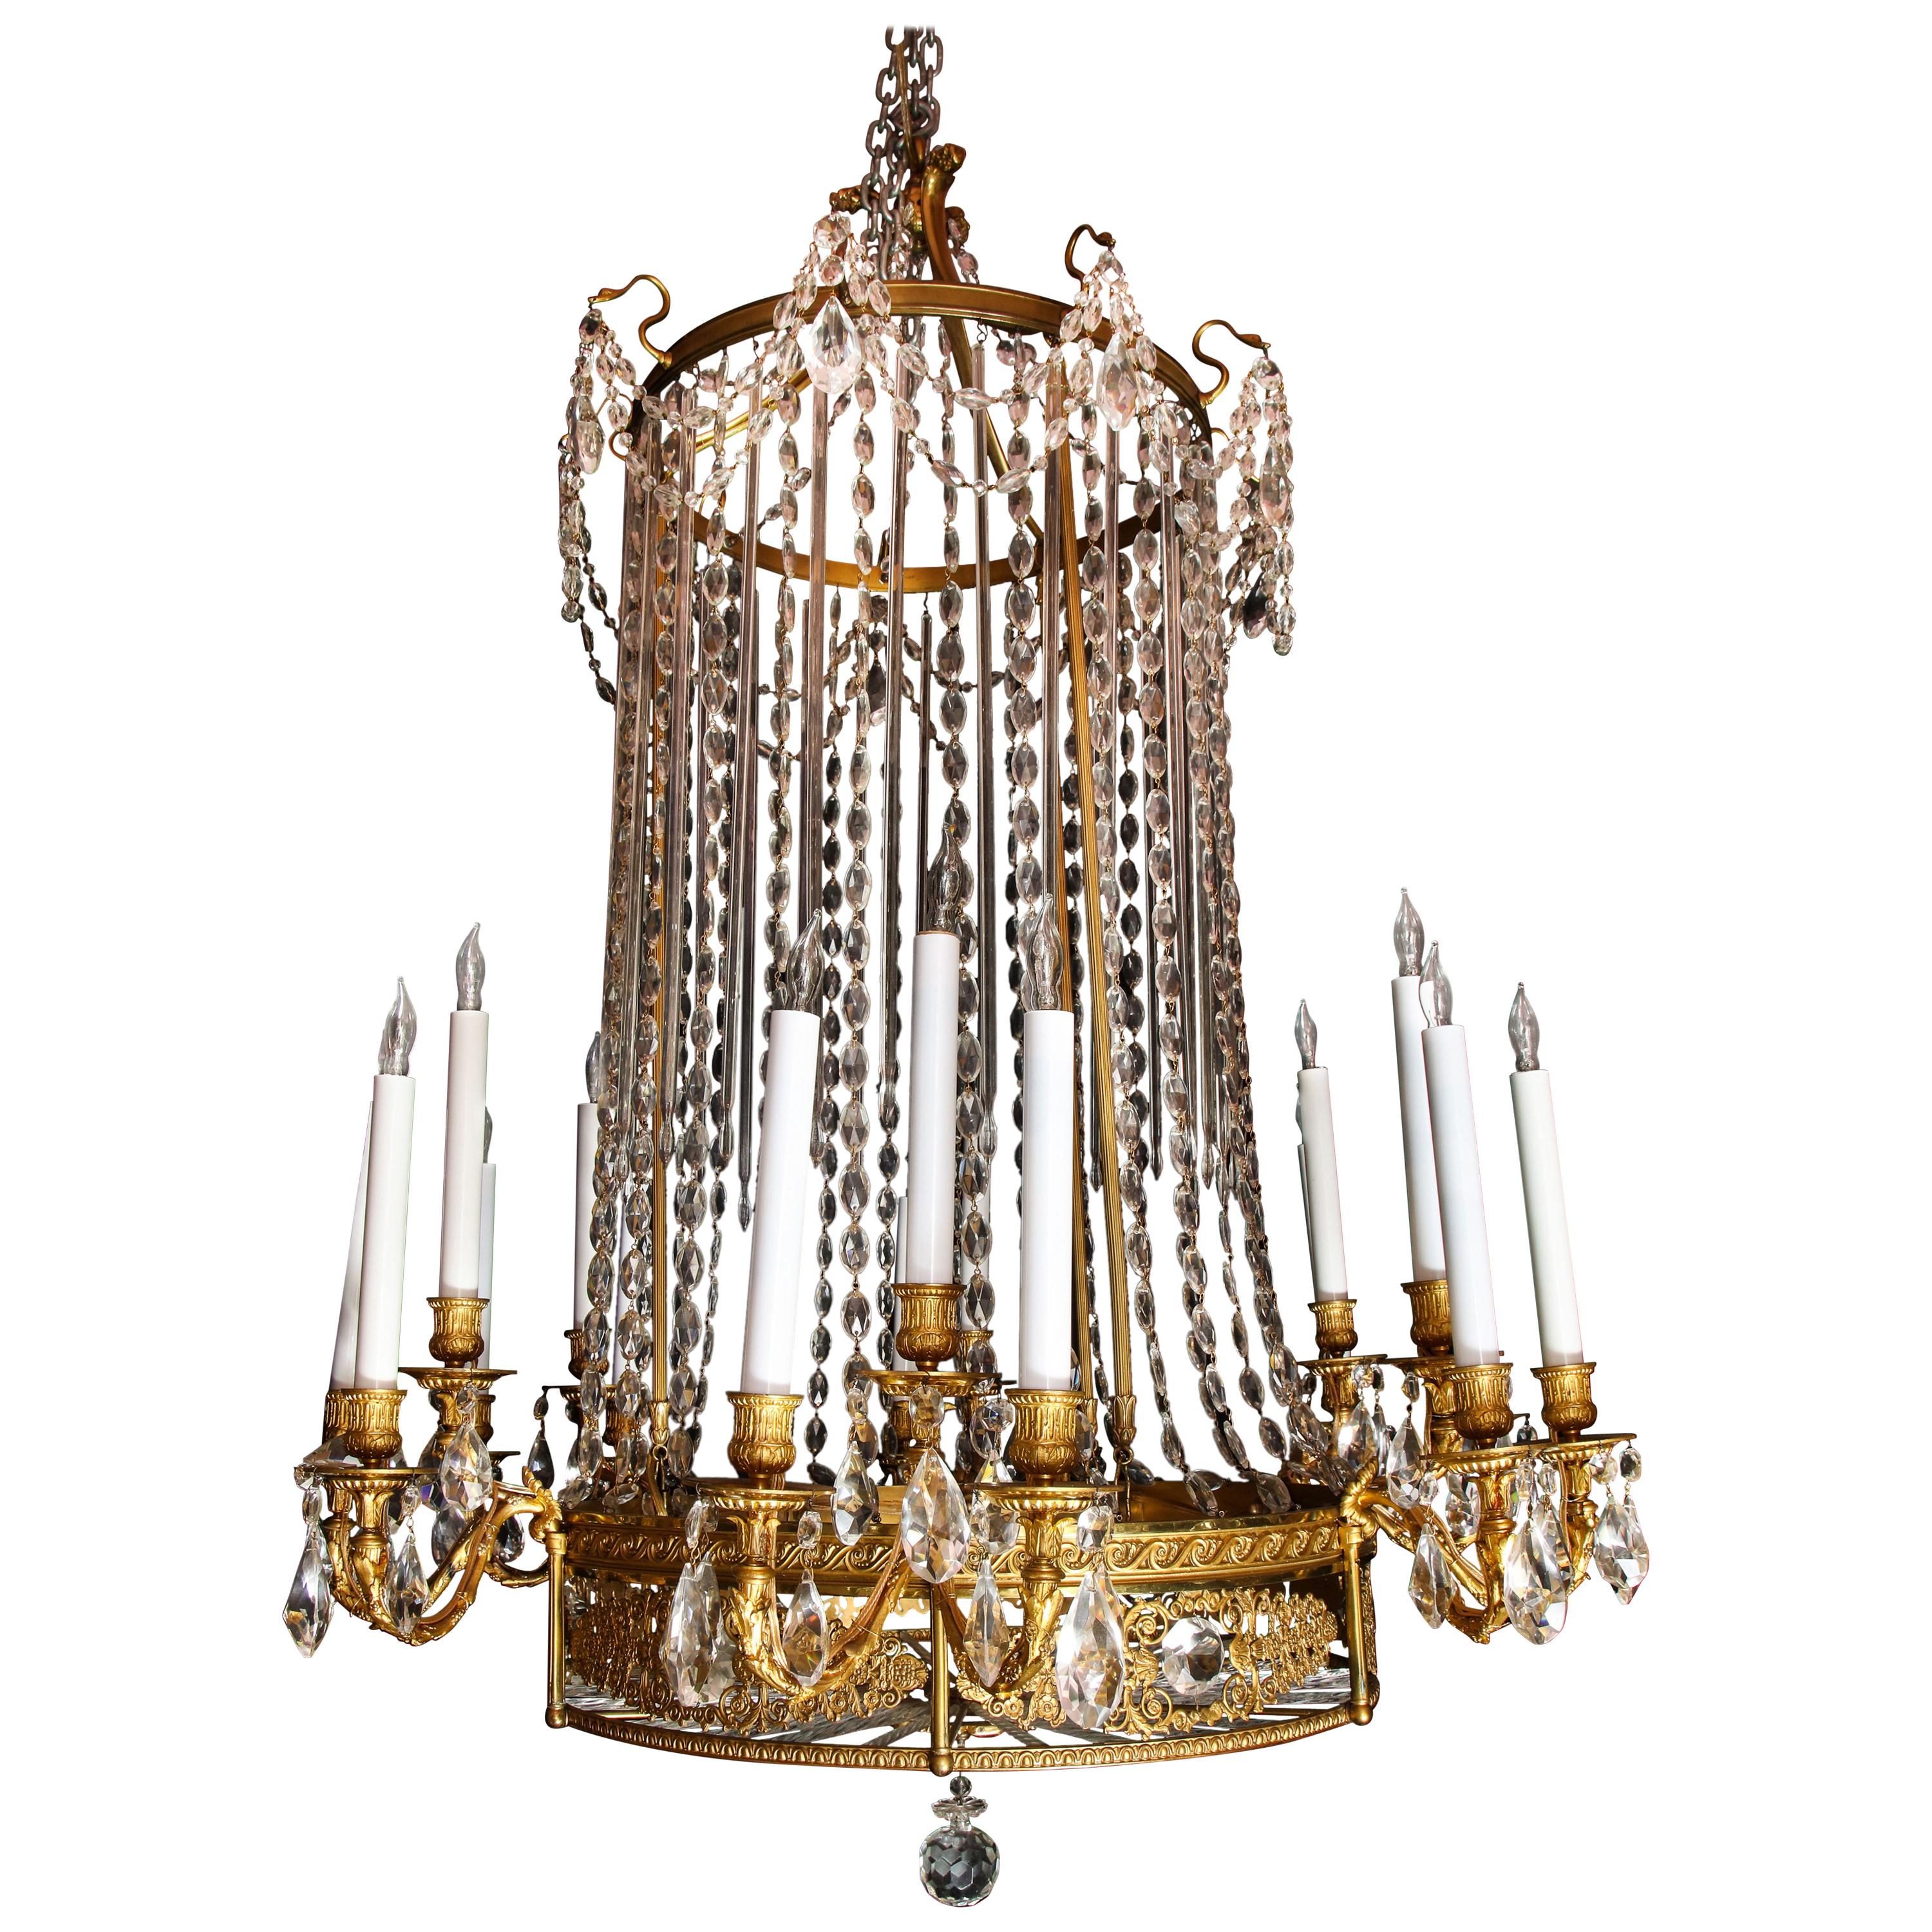 Fine Antique French Louis XVI Style Gilt Bronze and Cut Crystal Chandelier For Sale